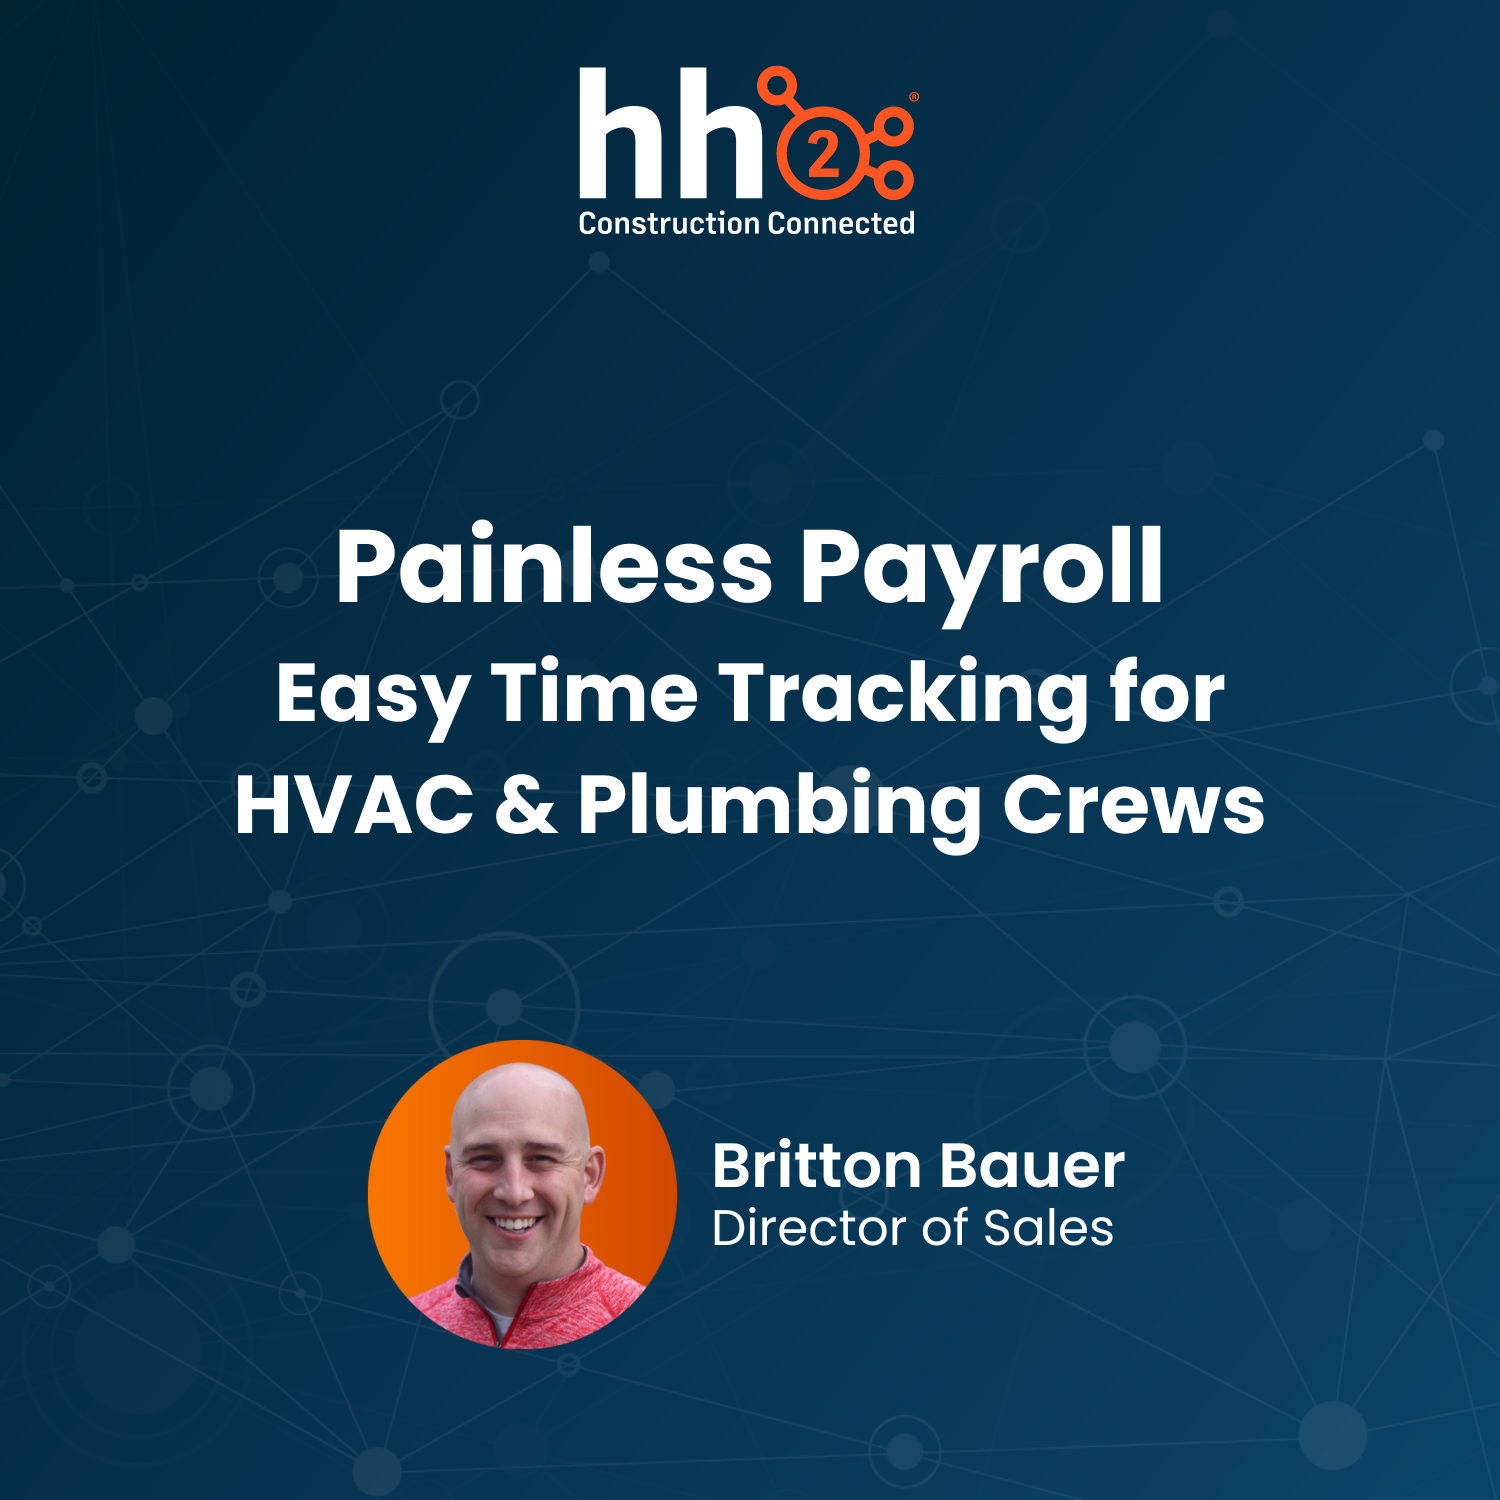 Painless Payroll: Easy Time Tracking for HVAC & Plumbing Crews